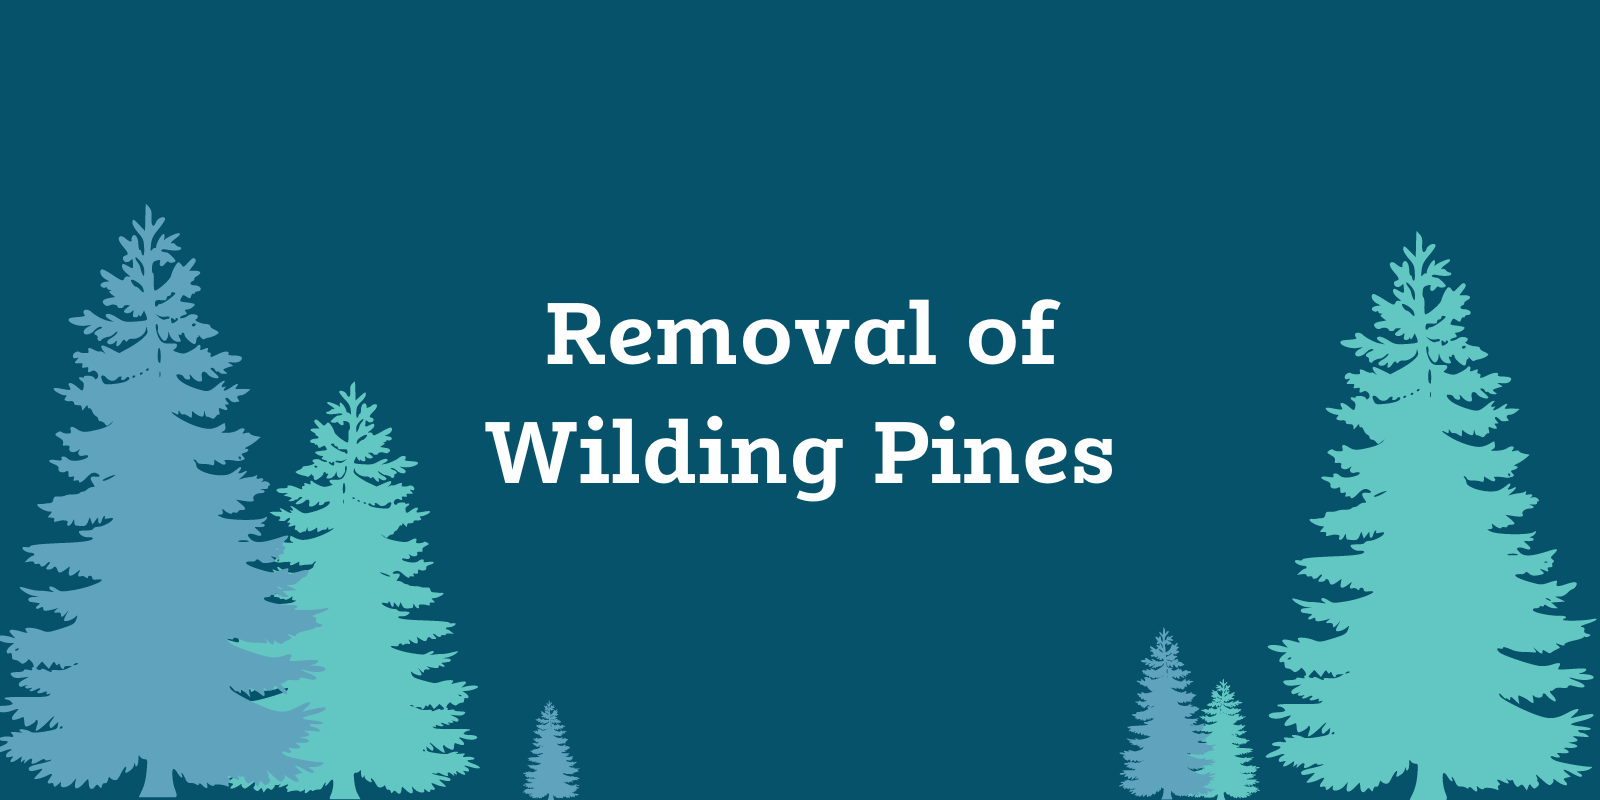 Removal of Wilding Pines banner image